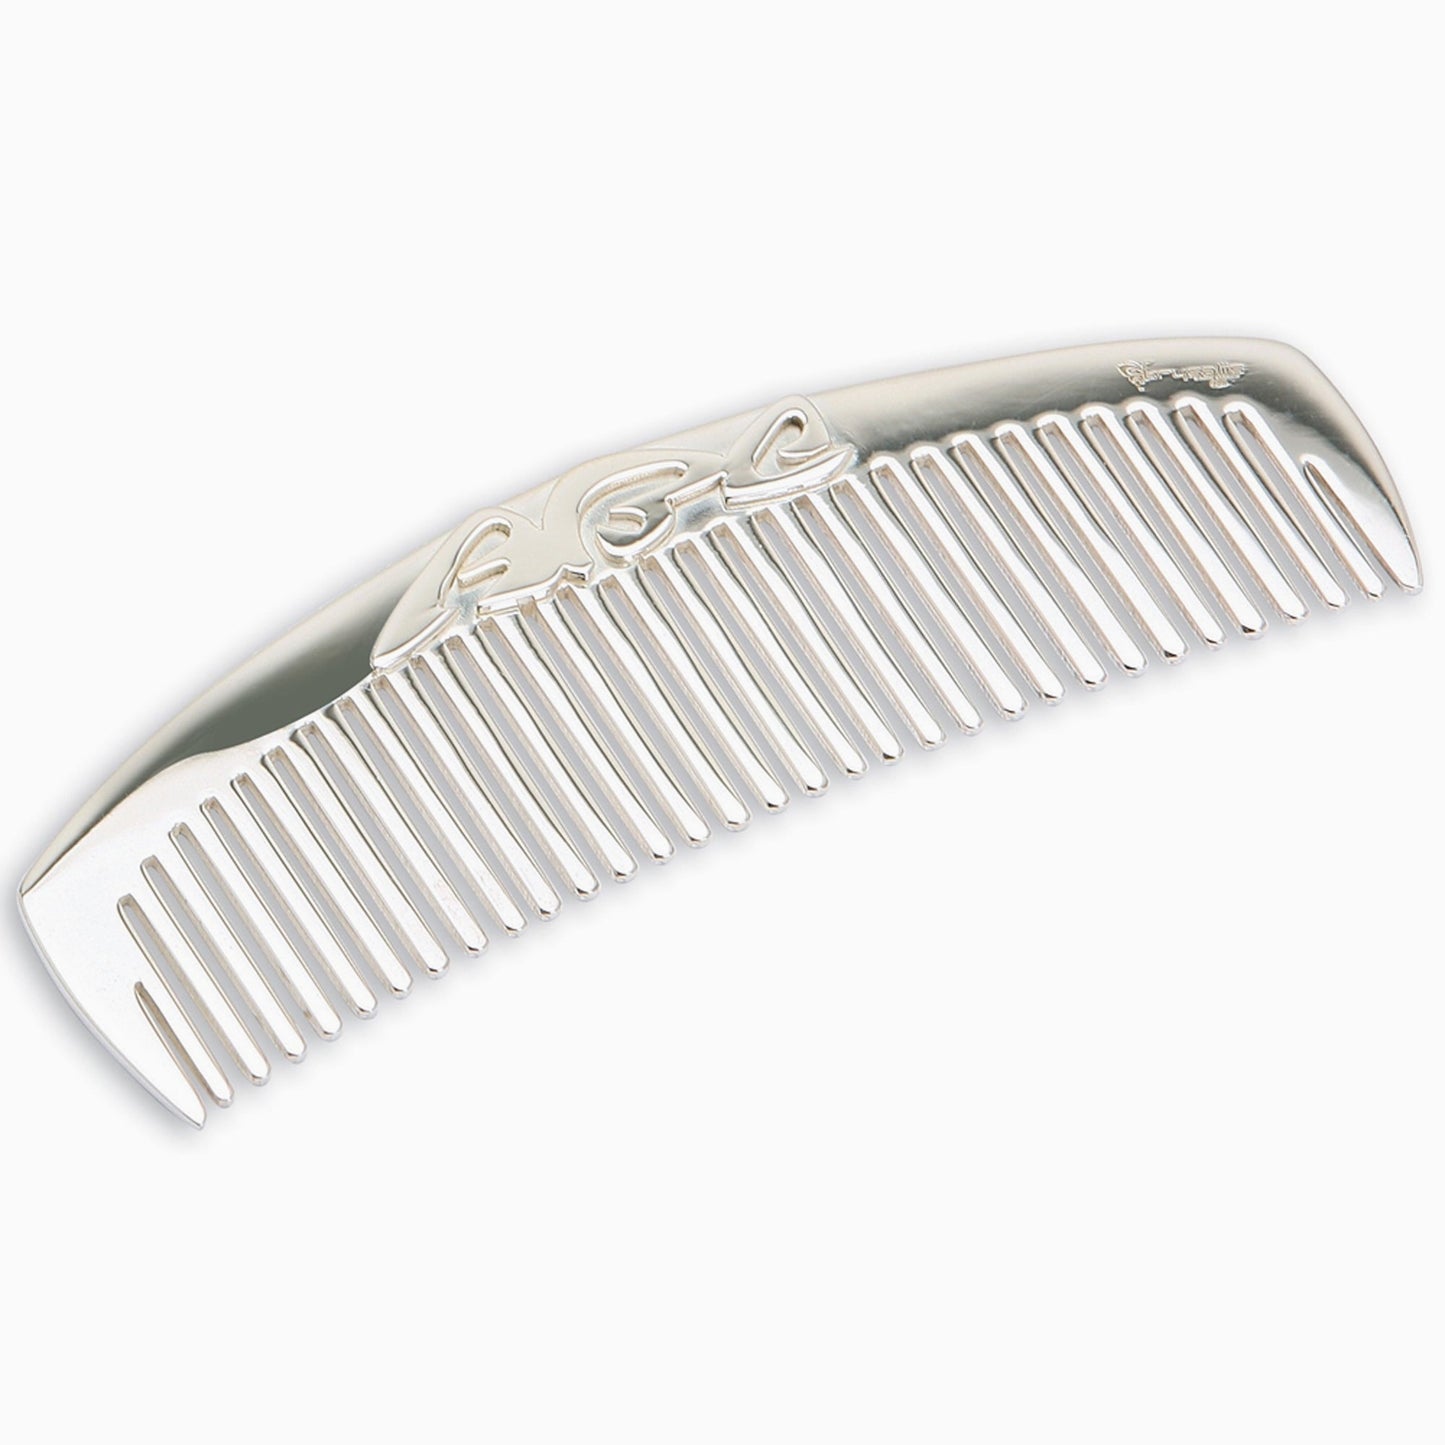 ABC Sterling Silver Baby Comb by Krysaliis